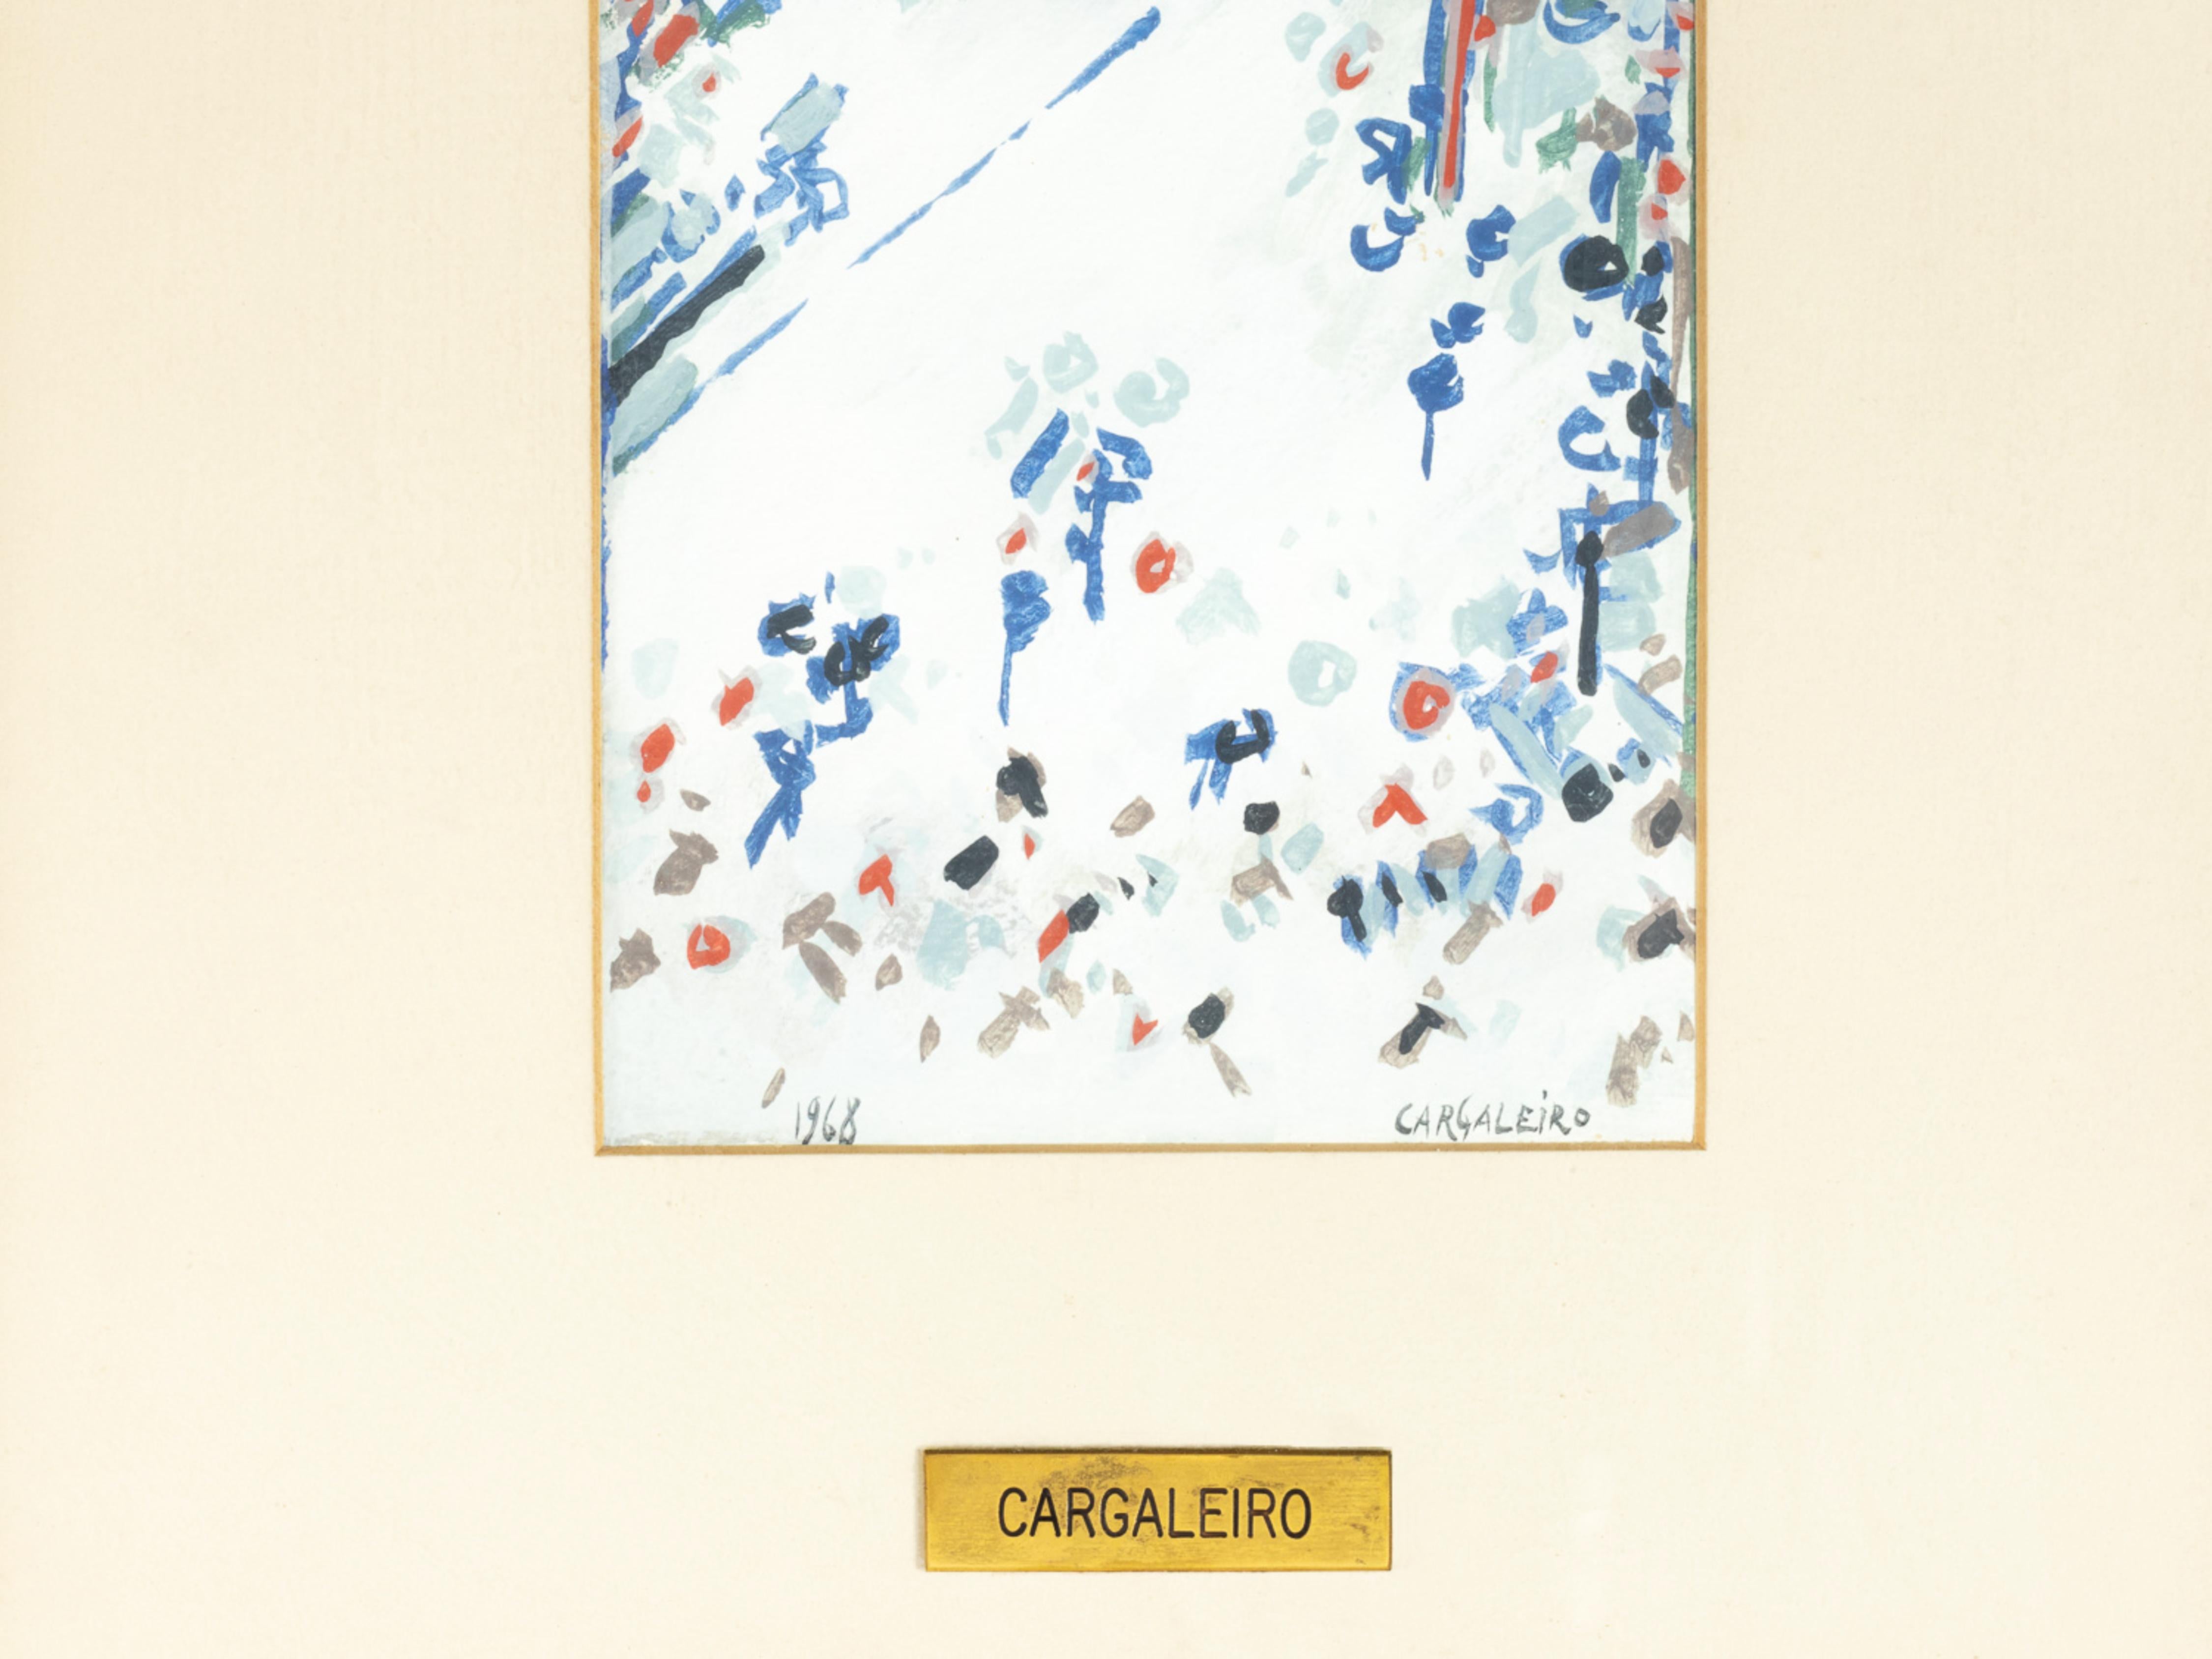 A modernist watercolor painting by portuguese Master Manuel Cargaleiro, signed, dated and authenticated - 1968. 

In the global art scene, Manuel Cargareiro gained notoriety by showcasing his artwork in Brazil, Japan, and European nations like